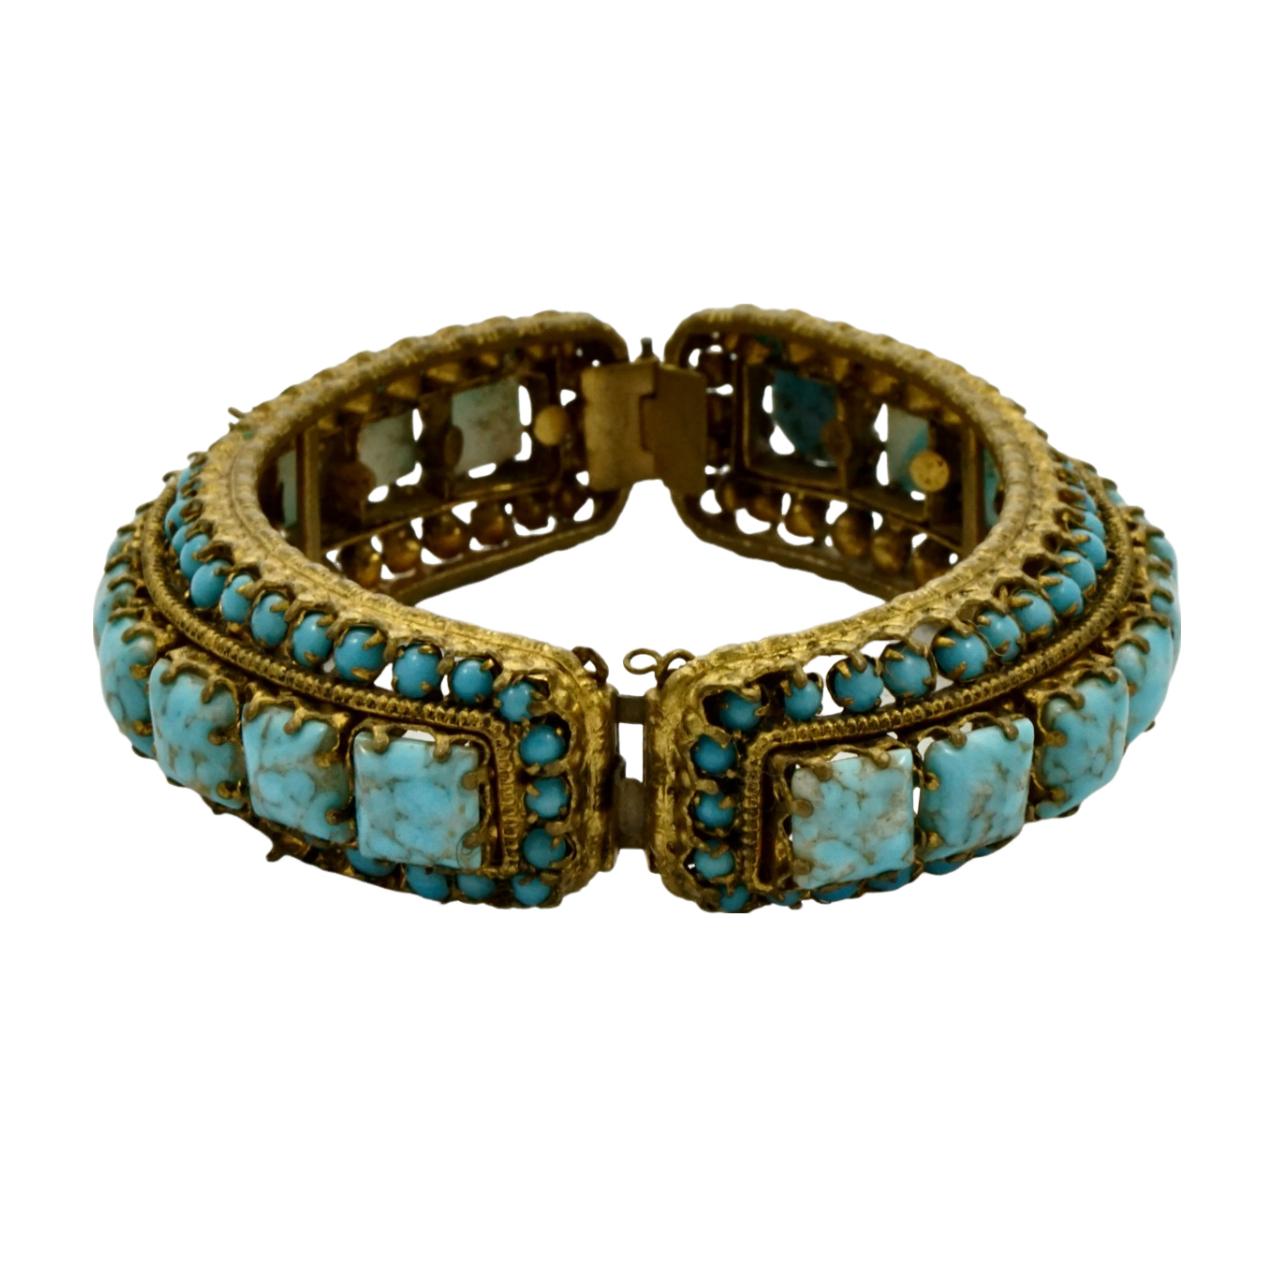 Women's or Men's Gold Plated and Black Enamel Bangle Bracelet with Faux Turquoise Stones For Sale